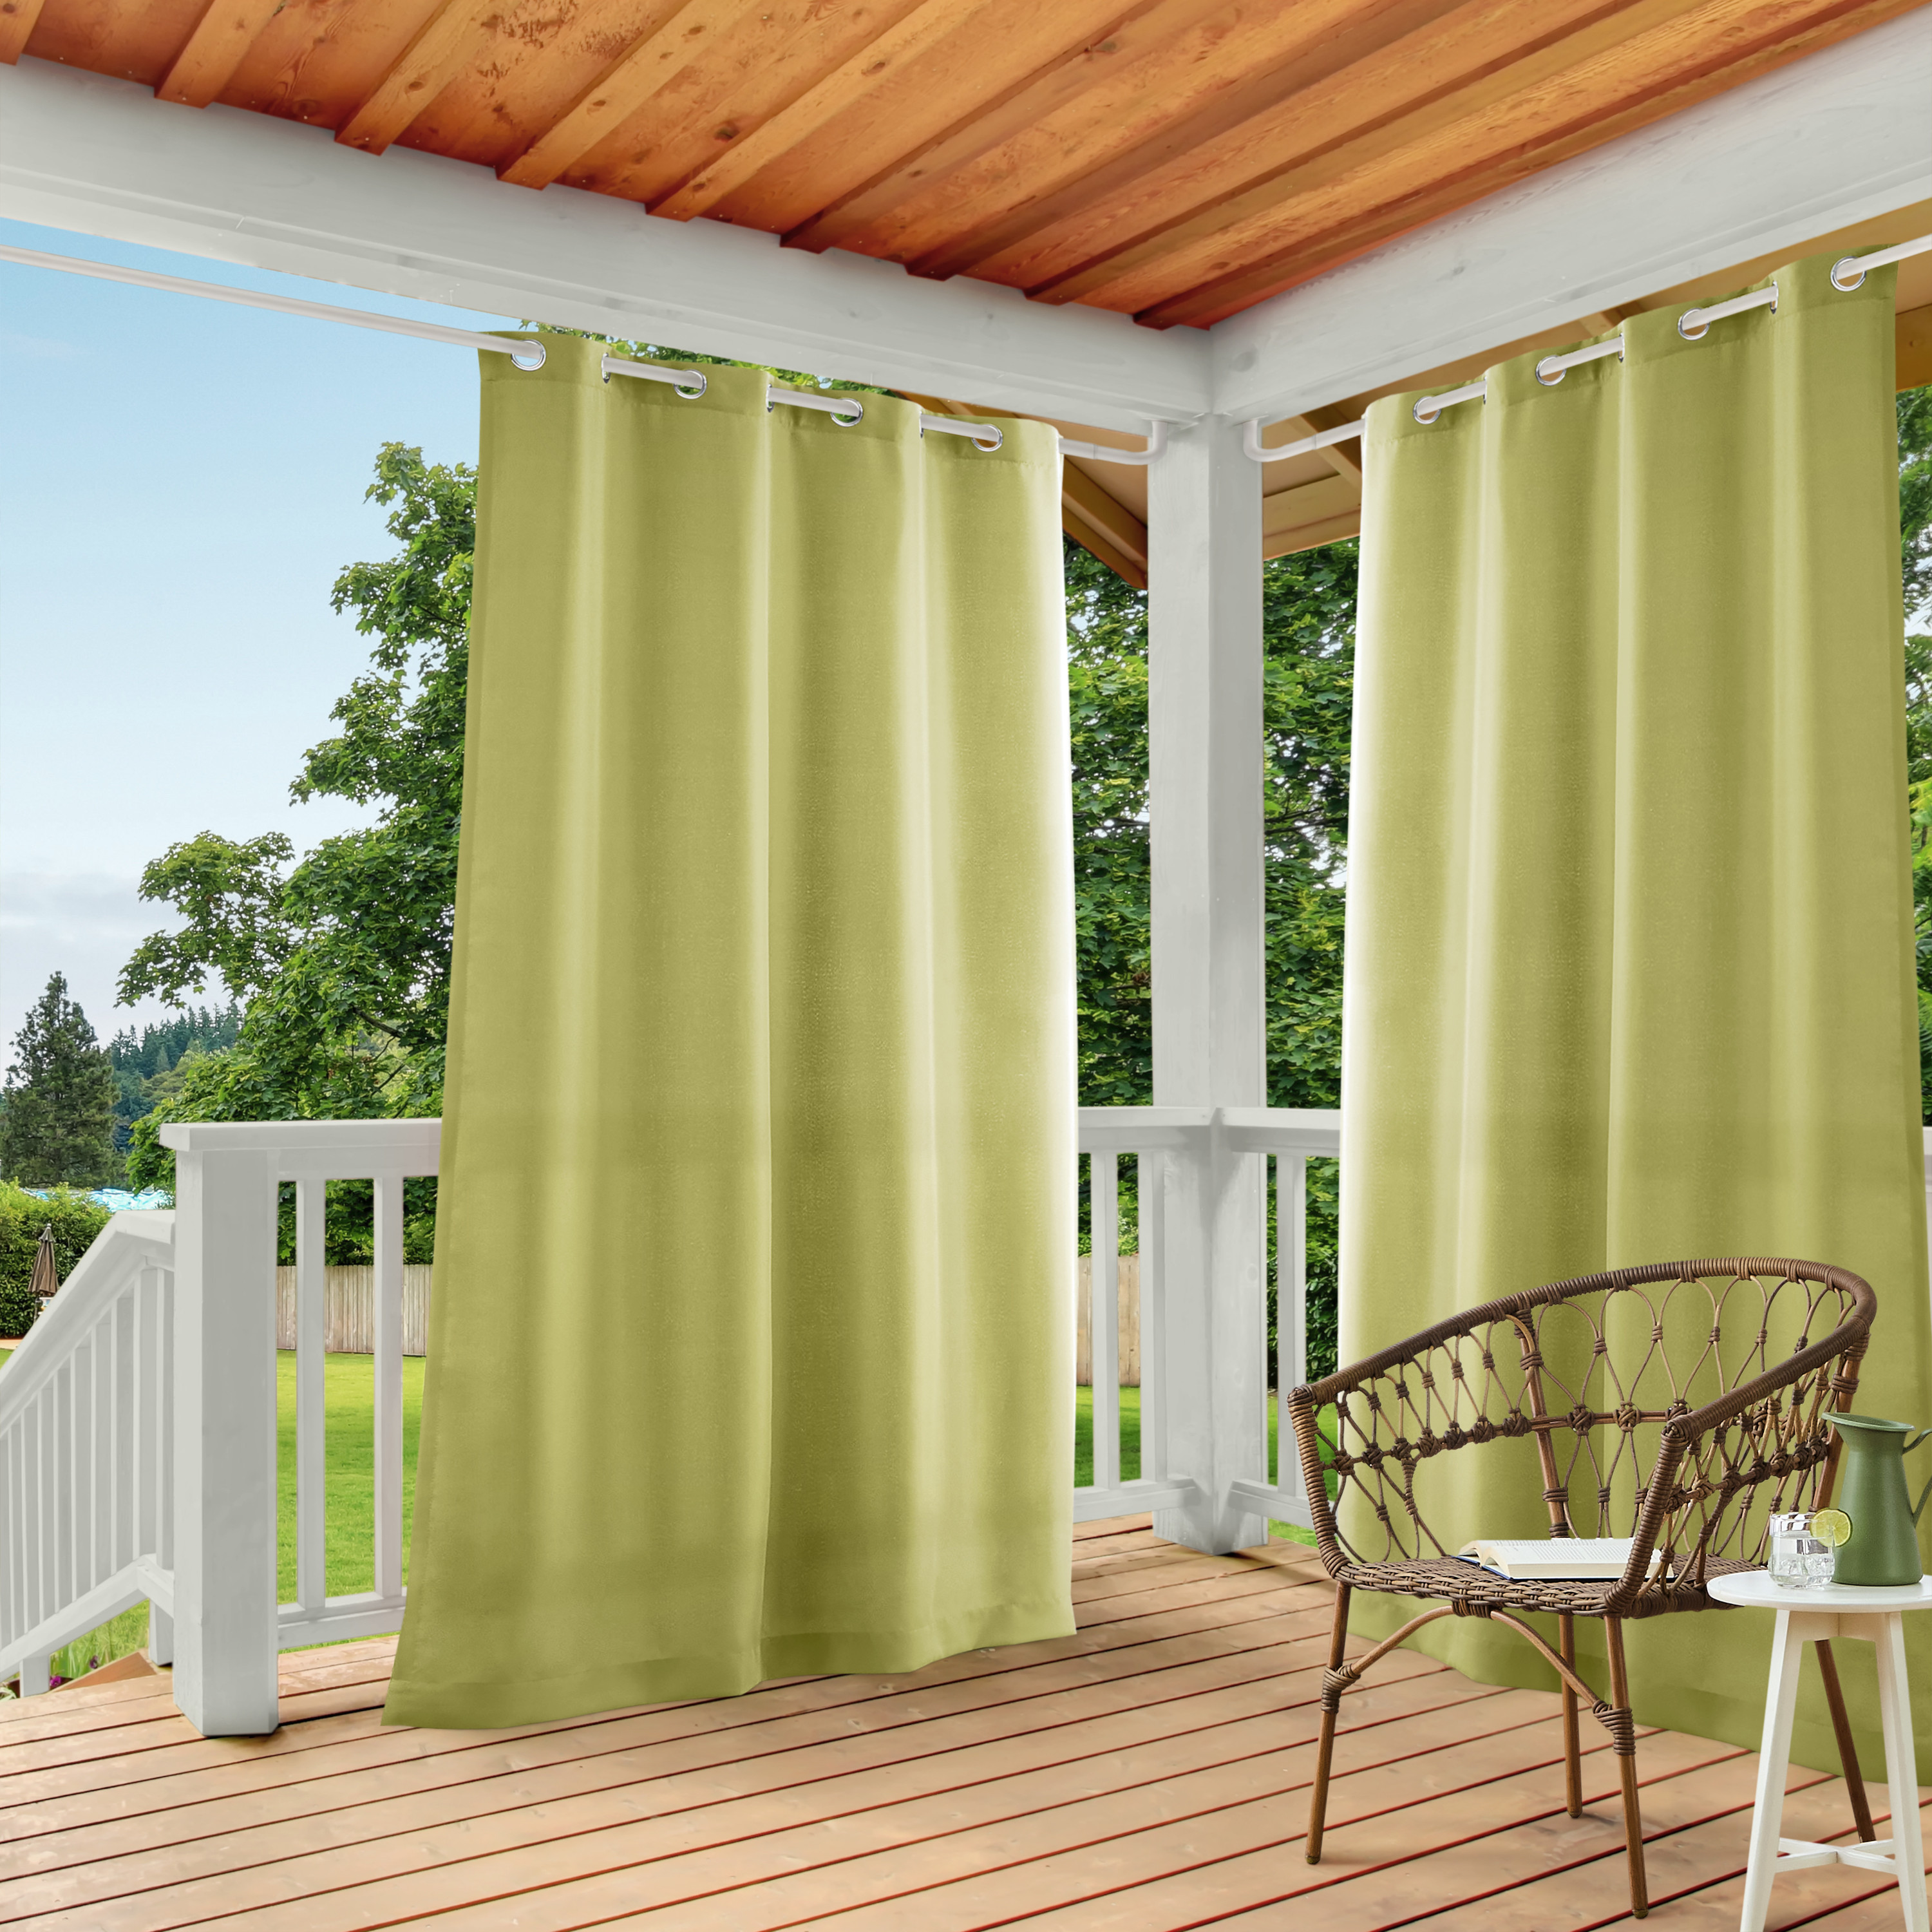 Exclusive Home Curtains Indoor/Outdoor Solid Cabana Grommet Top Curtain Panel Pair, 54x84, Kiwi Green - image 1 of 10